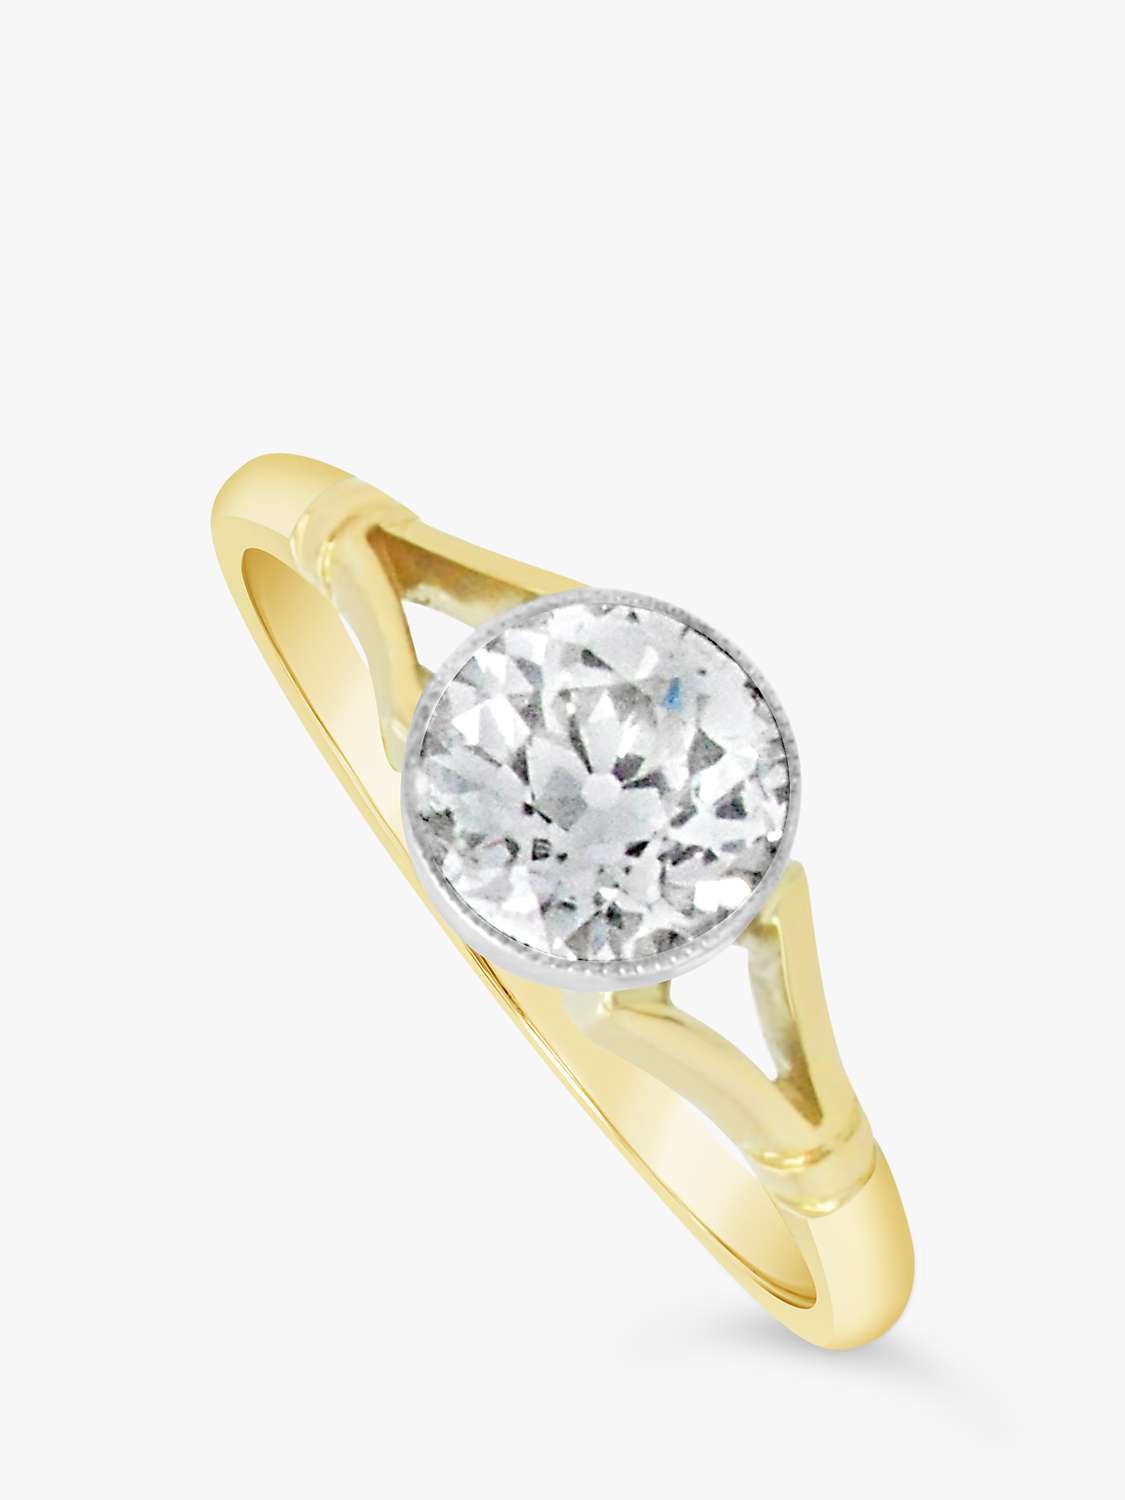 Buy Milton & Humble Jewellery Second Hand 18ct White & Yellow Gold Old Cut Diamond Ring, Dated 1910/11 Online at johnlewis.com